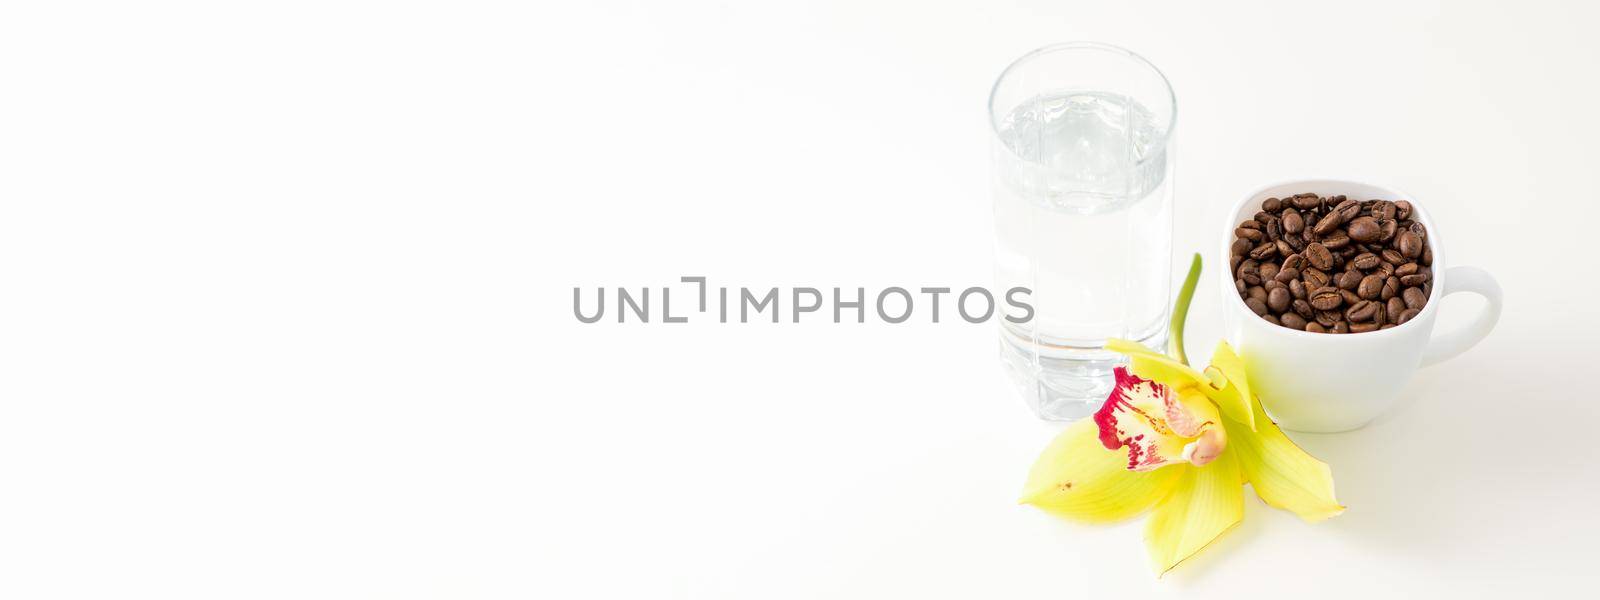 Cup of coffee beans and glass of water with yellow orchid flower against a white background